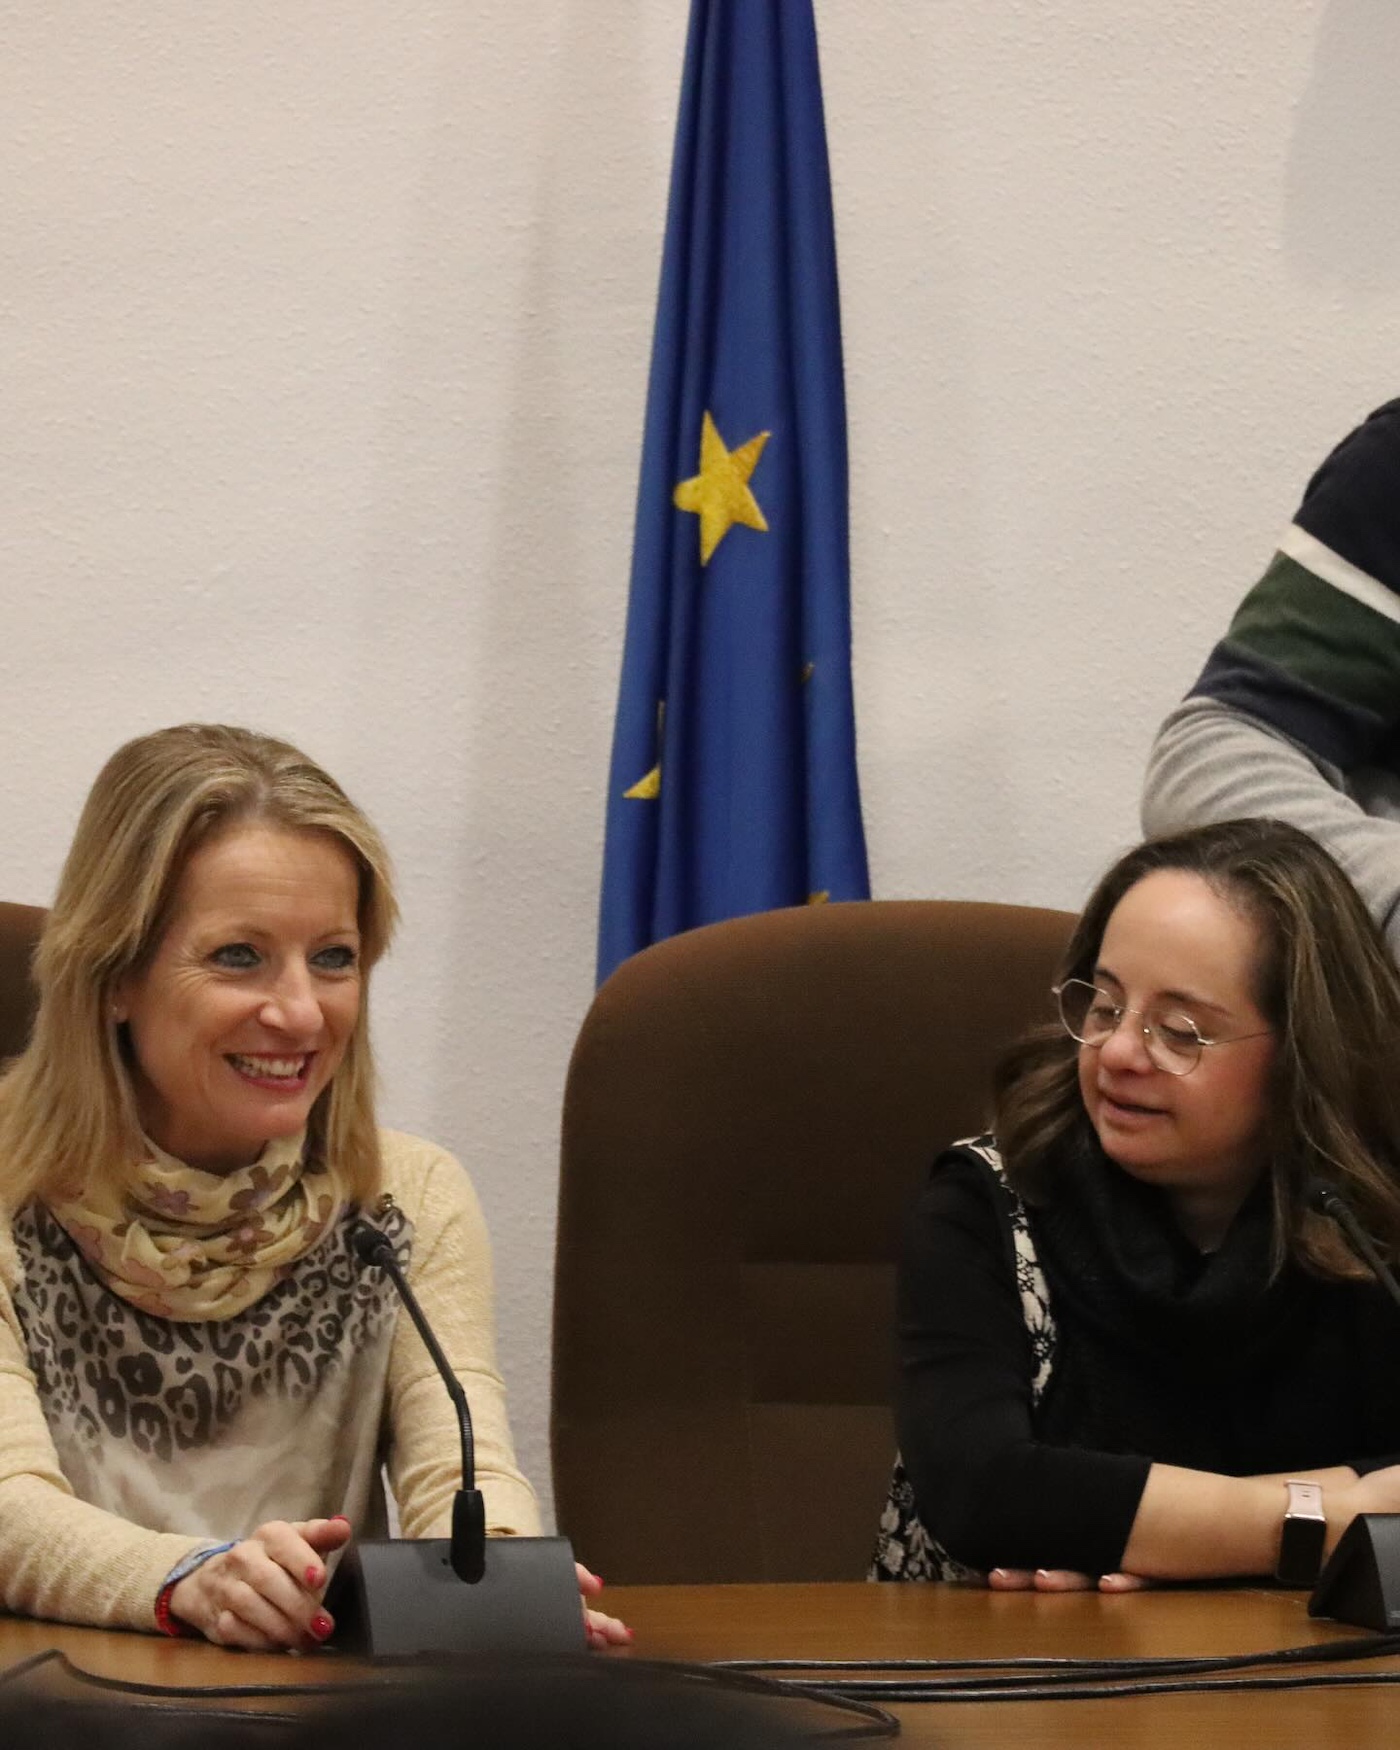 This Woman Has Become Spain’s First Lawmaker With Down Syndrome